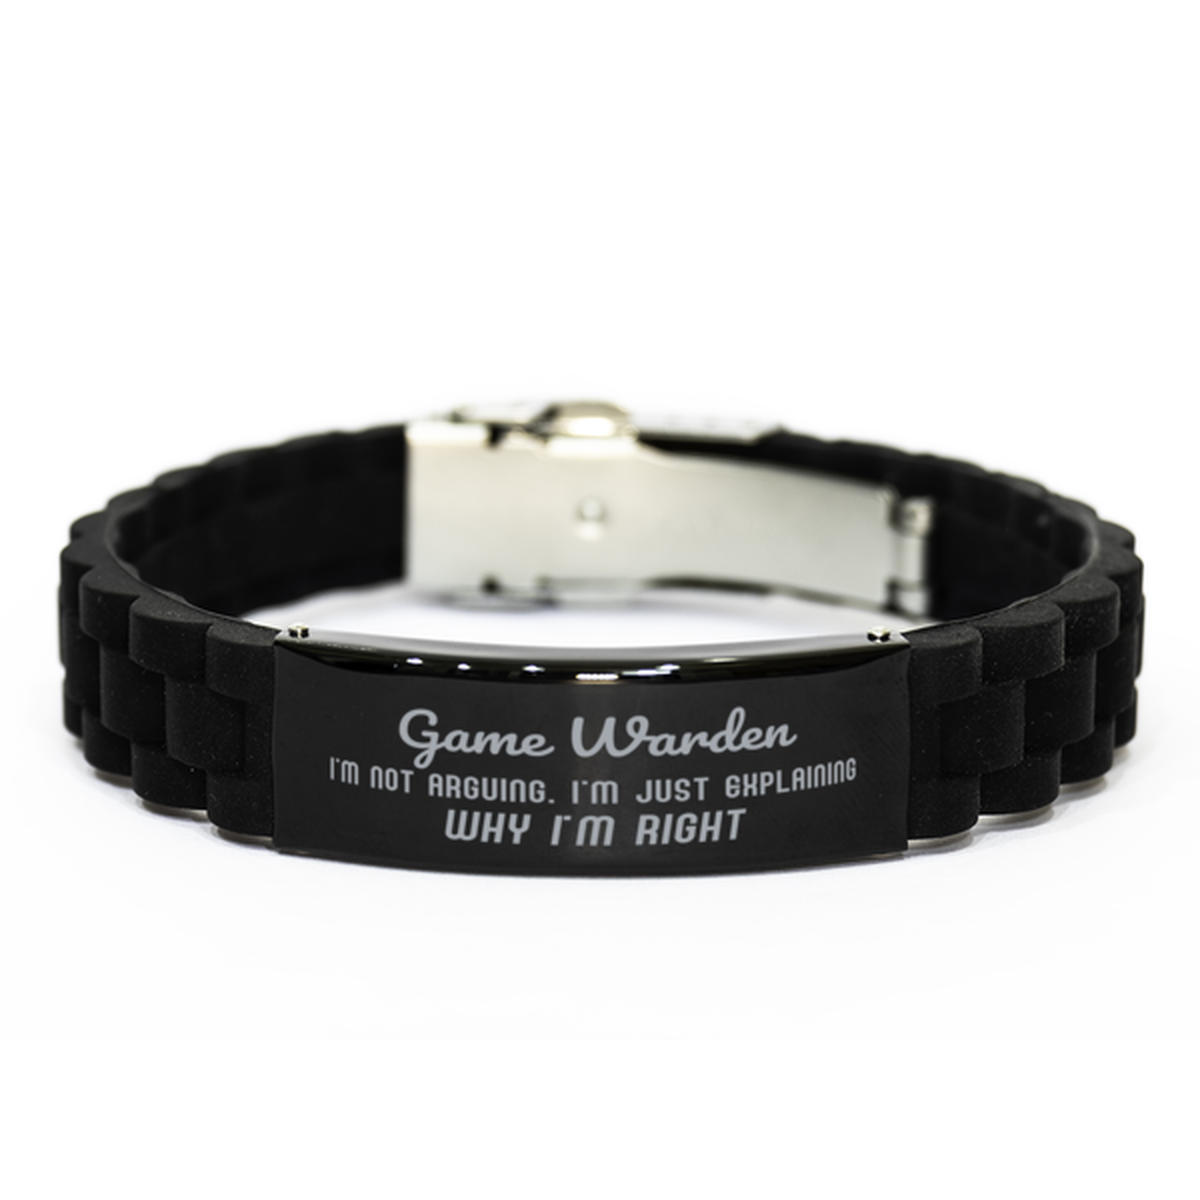 Game Warden I'm not Arguing. I'm Just Explaining Why I'm RIGHT Black Glidelock Clasp Bracelet, Funny Saying Quote Game Warden Gifts For Game Warden Graduation Birthday Christmas Gifts for Men Women Coworker